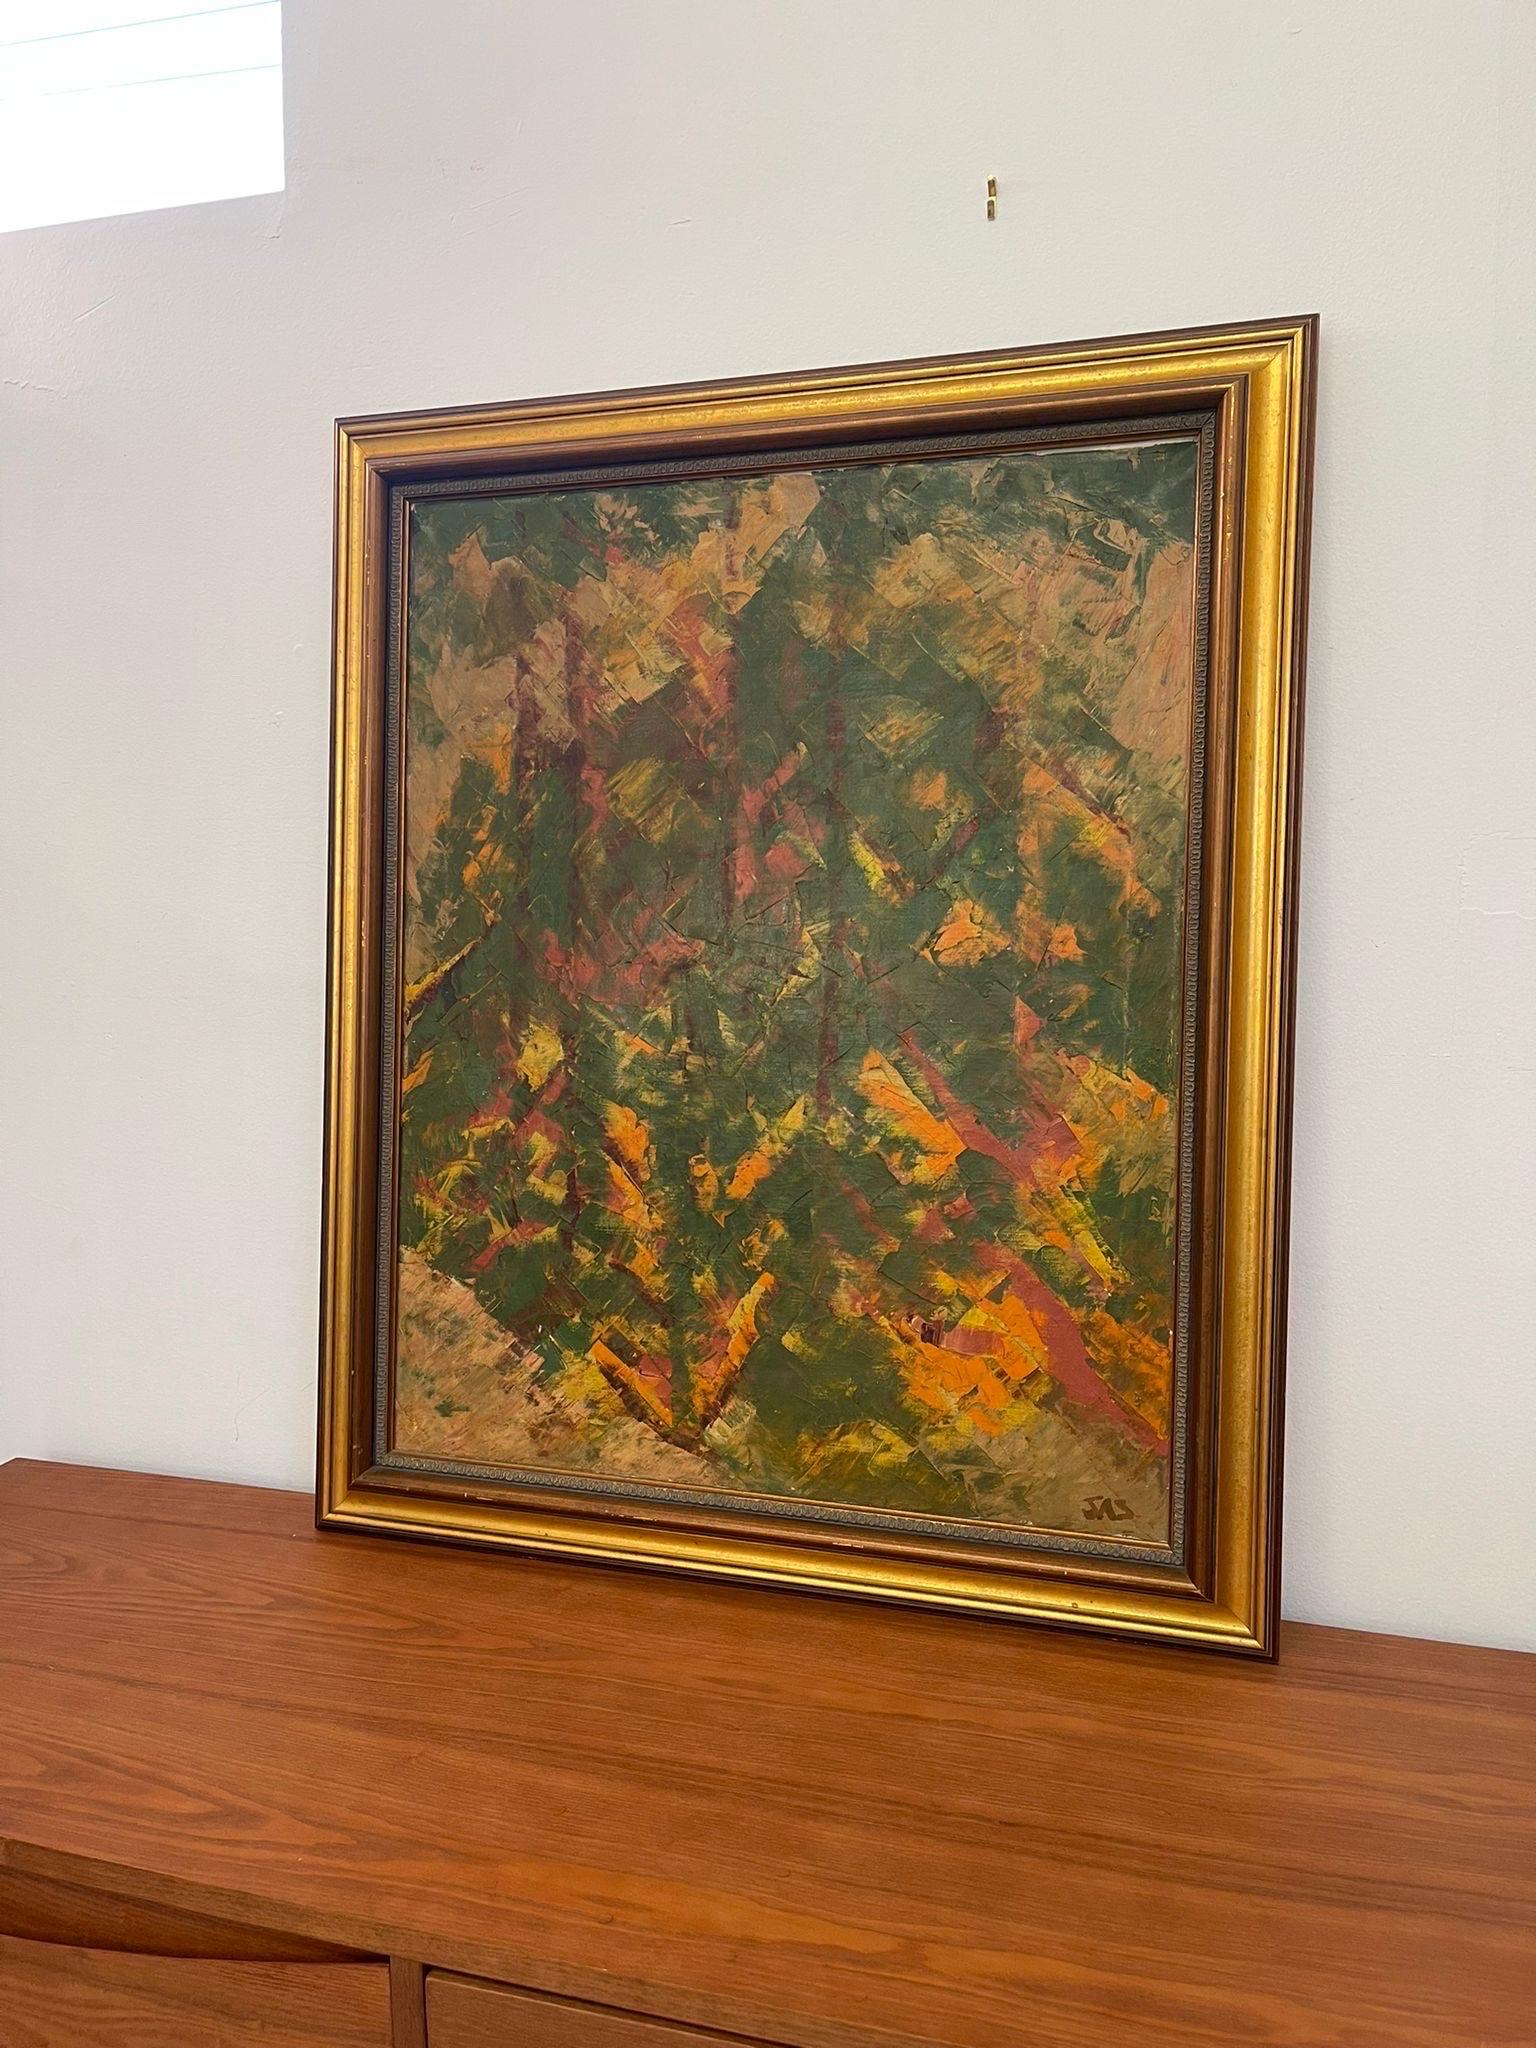 Possibly Acrylic on Canvas within wood frame. Frame has gold Accent. Muted color palette primarily green and orange. Signed in the Lower Corner as pictured. Vintage Condition Consistent with Age as Pictured.

Dimensions. 29 1/2 W ; 3/4 D ; 35 H